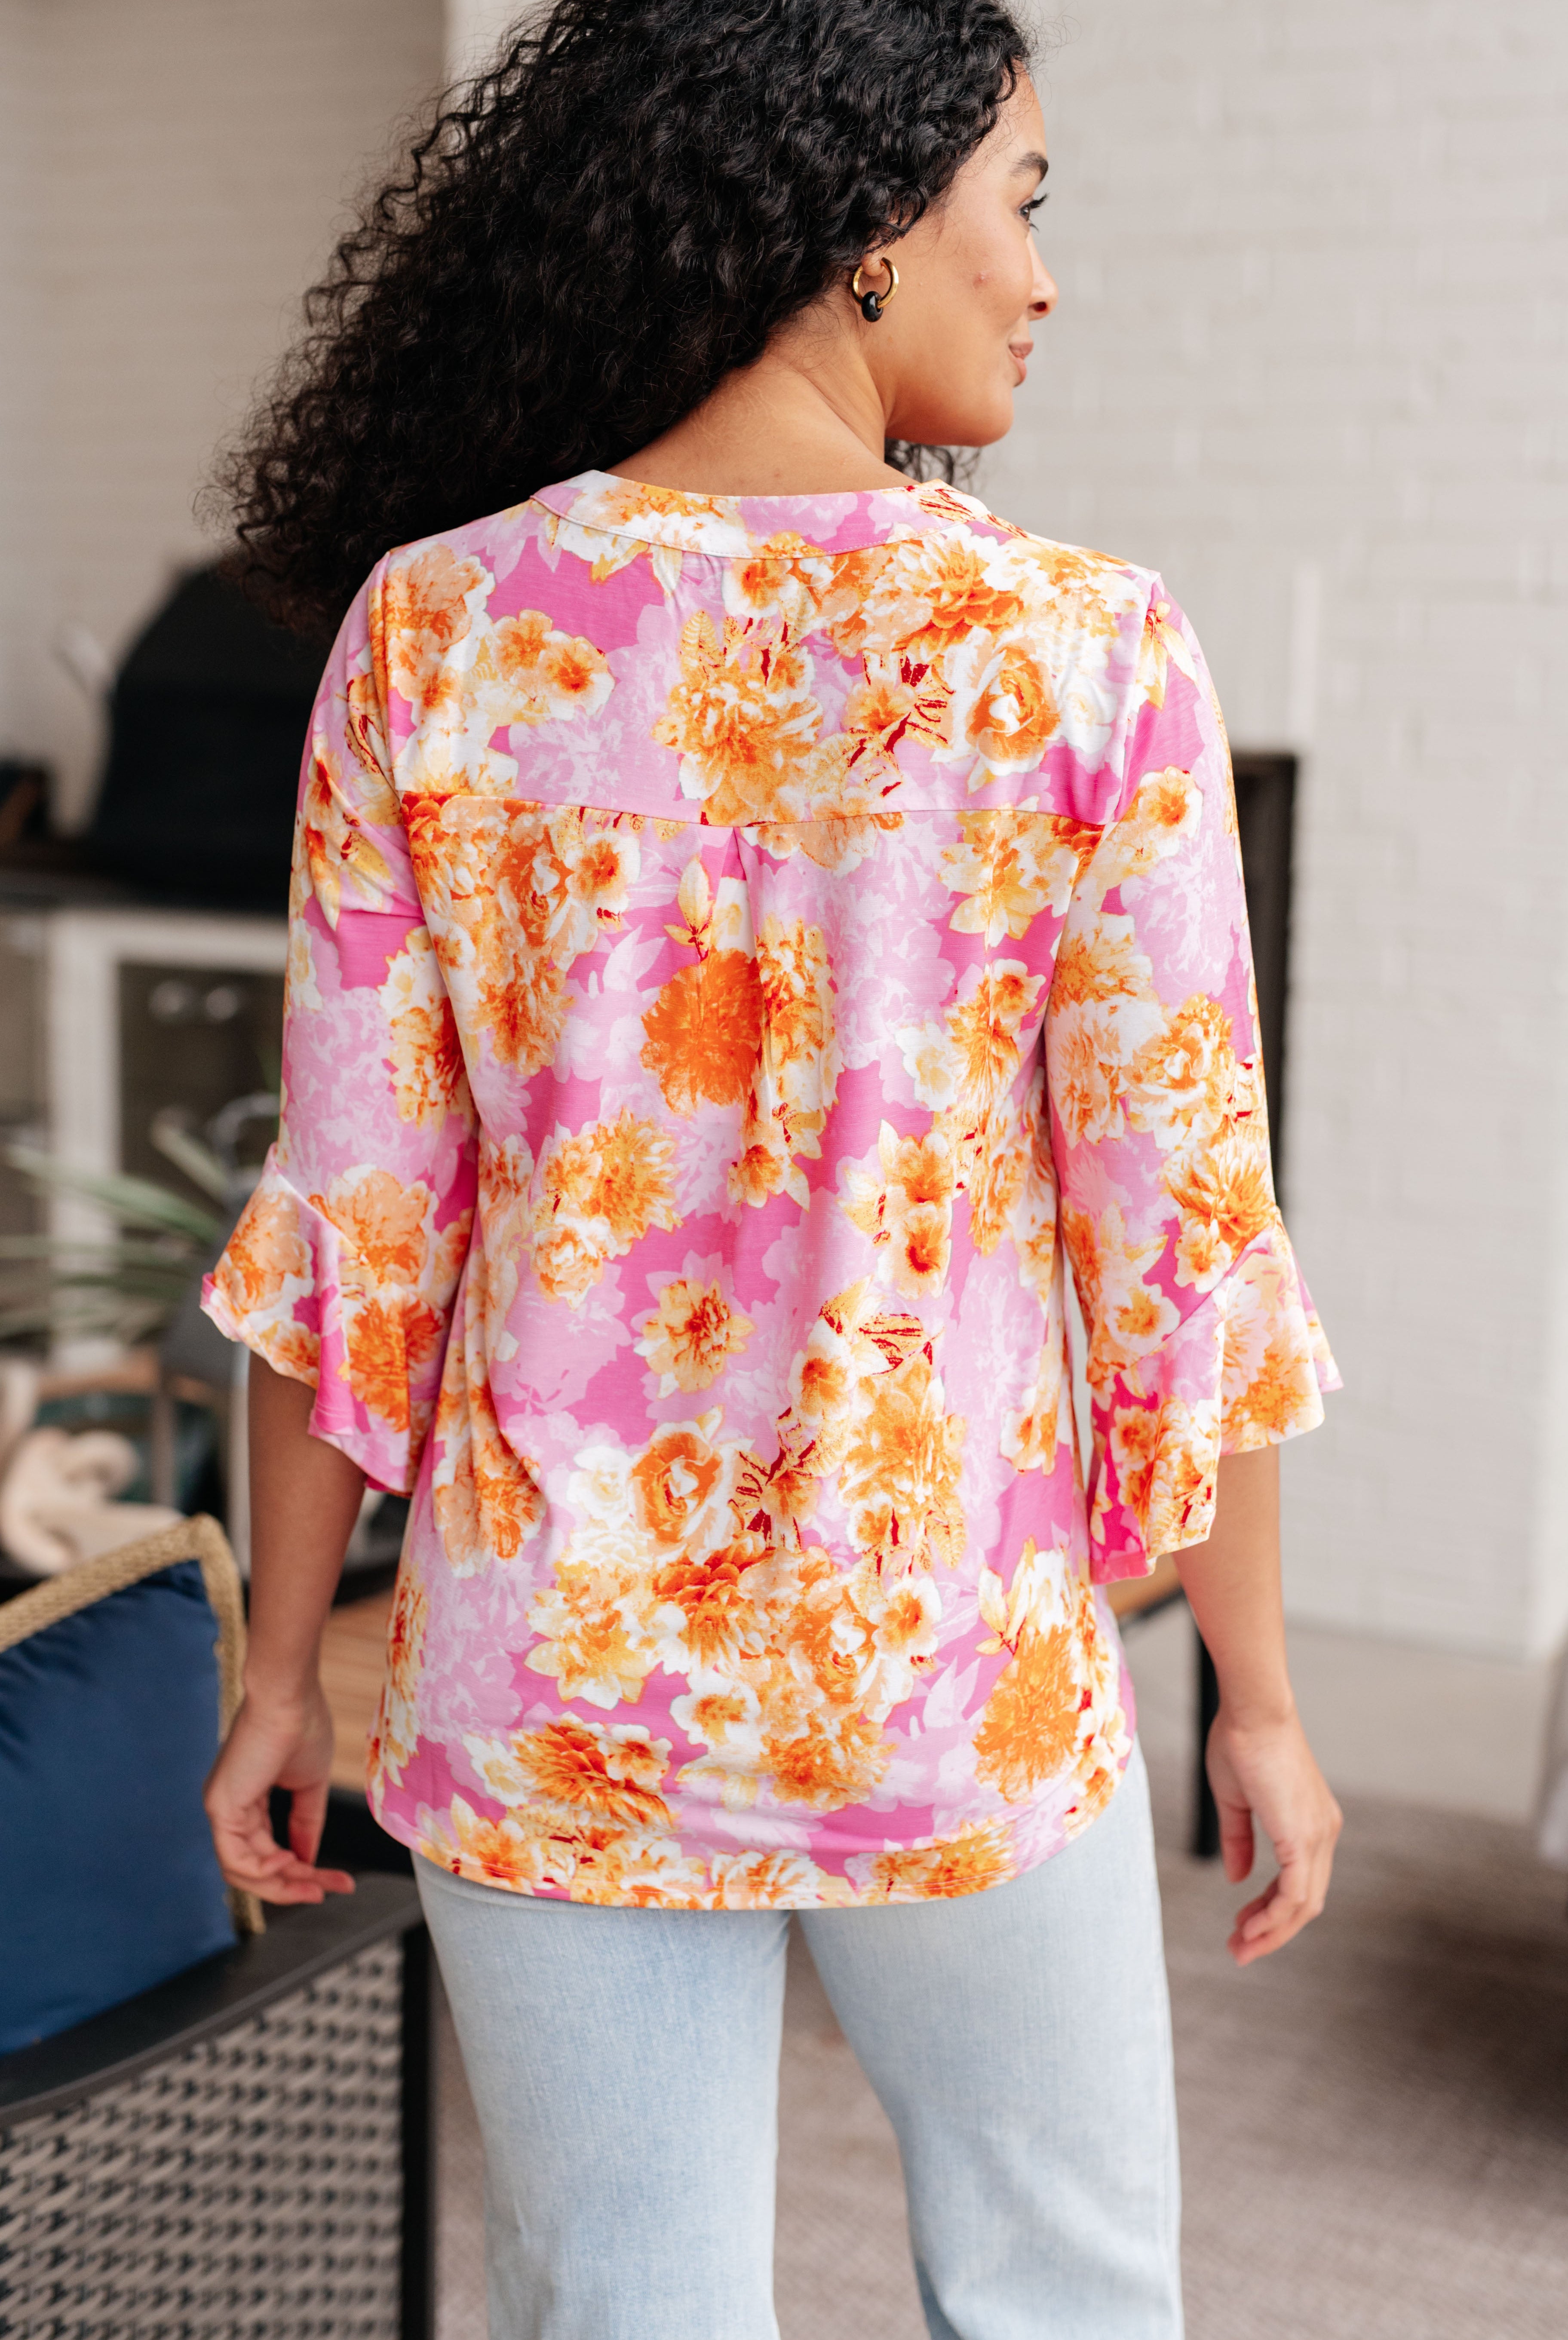 Lizzy Bell Sleeve Top in Pink and Gold Floral-Tops-Ave Shops-Urban Threadz Boutique, Women's Fashion Boutique in Saugatuck, MI